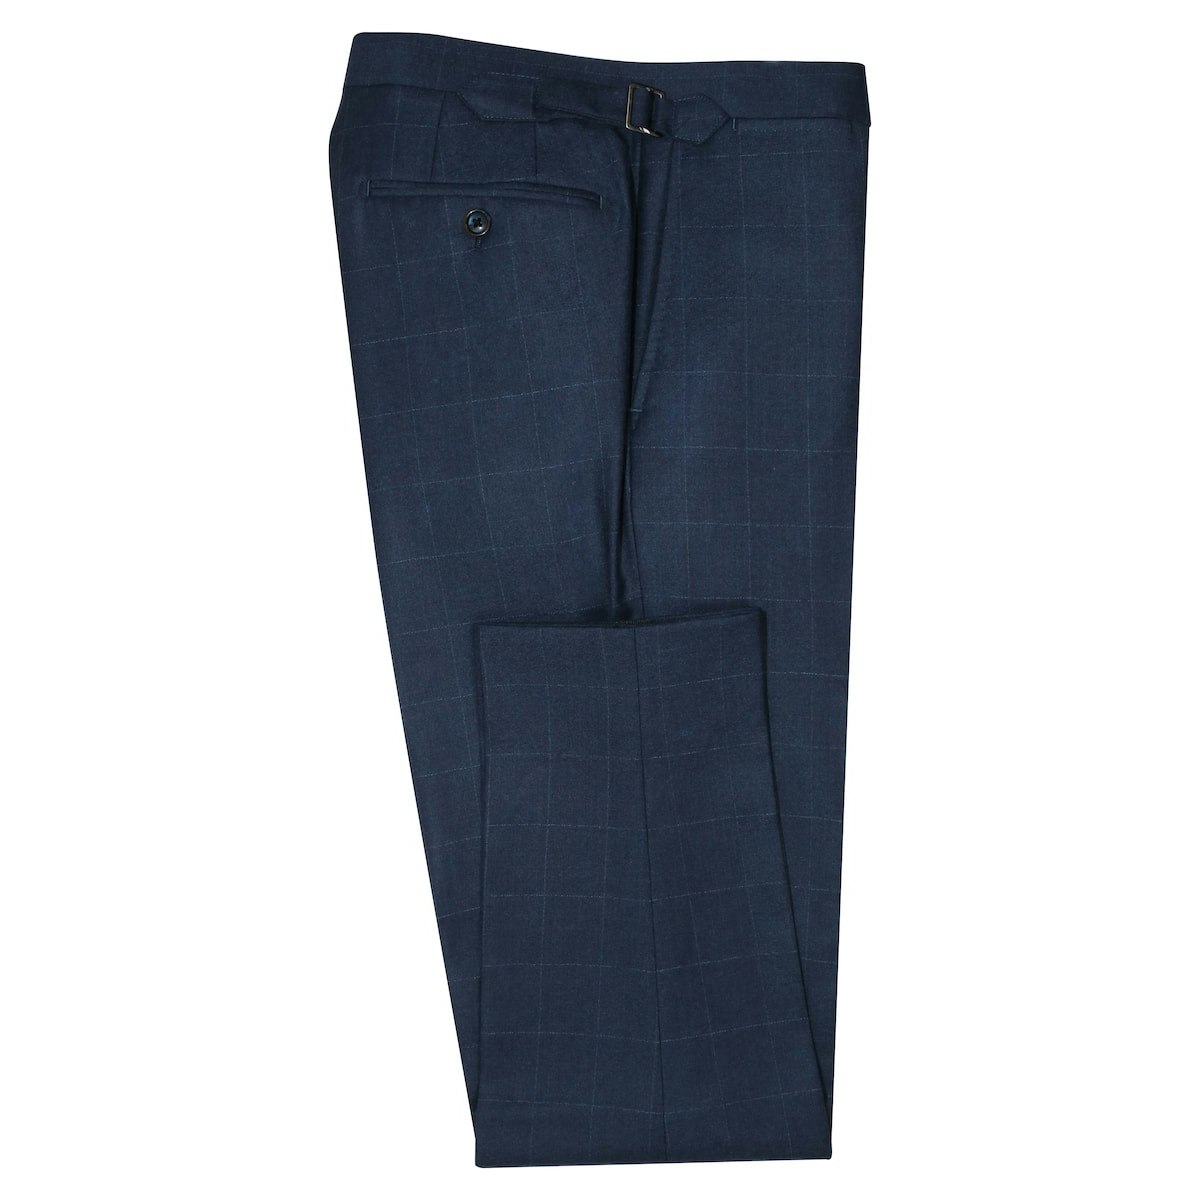 InStitchu Collection The Grant Pants